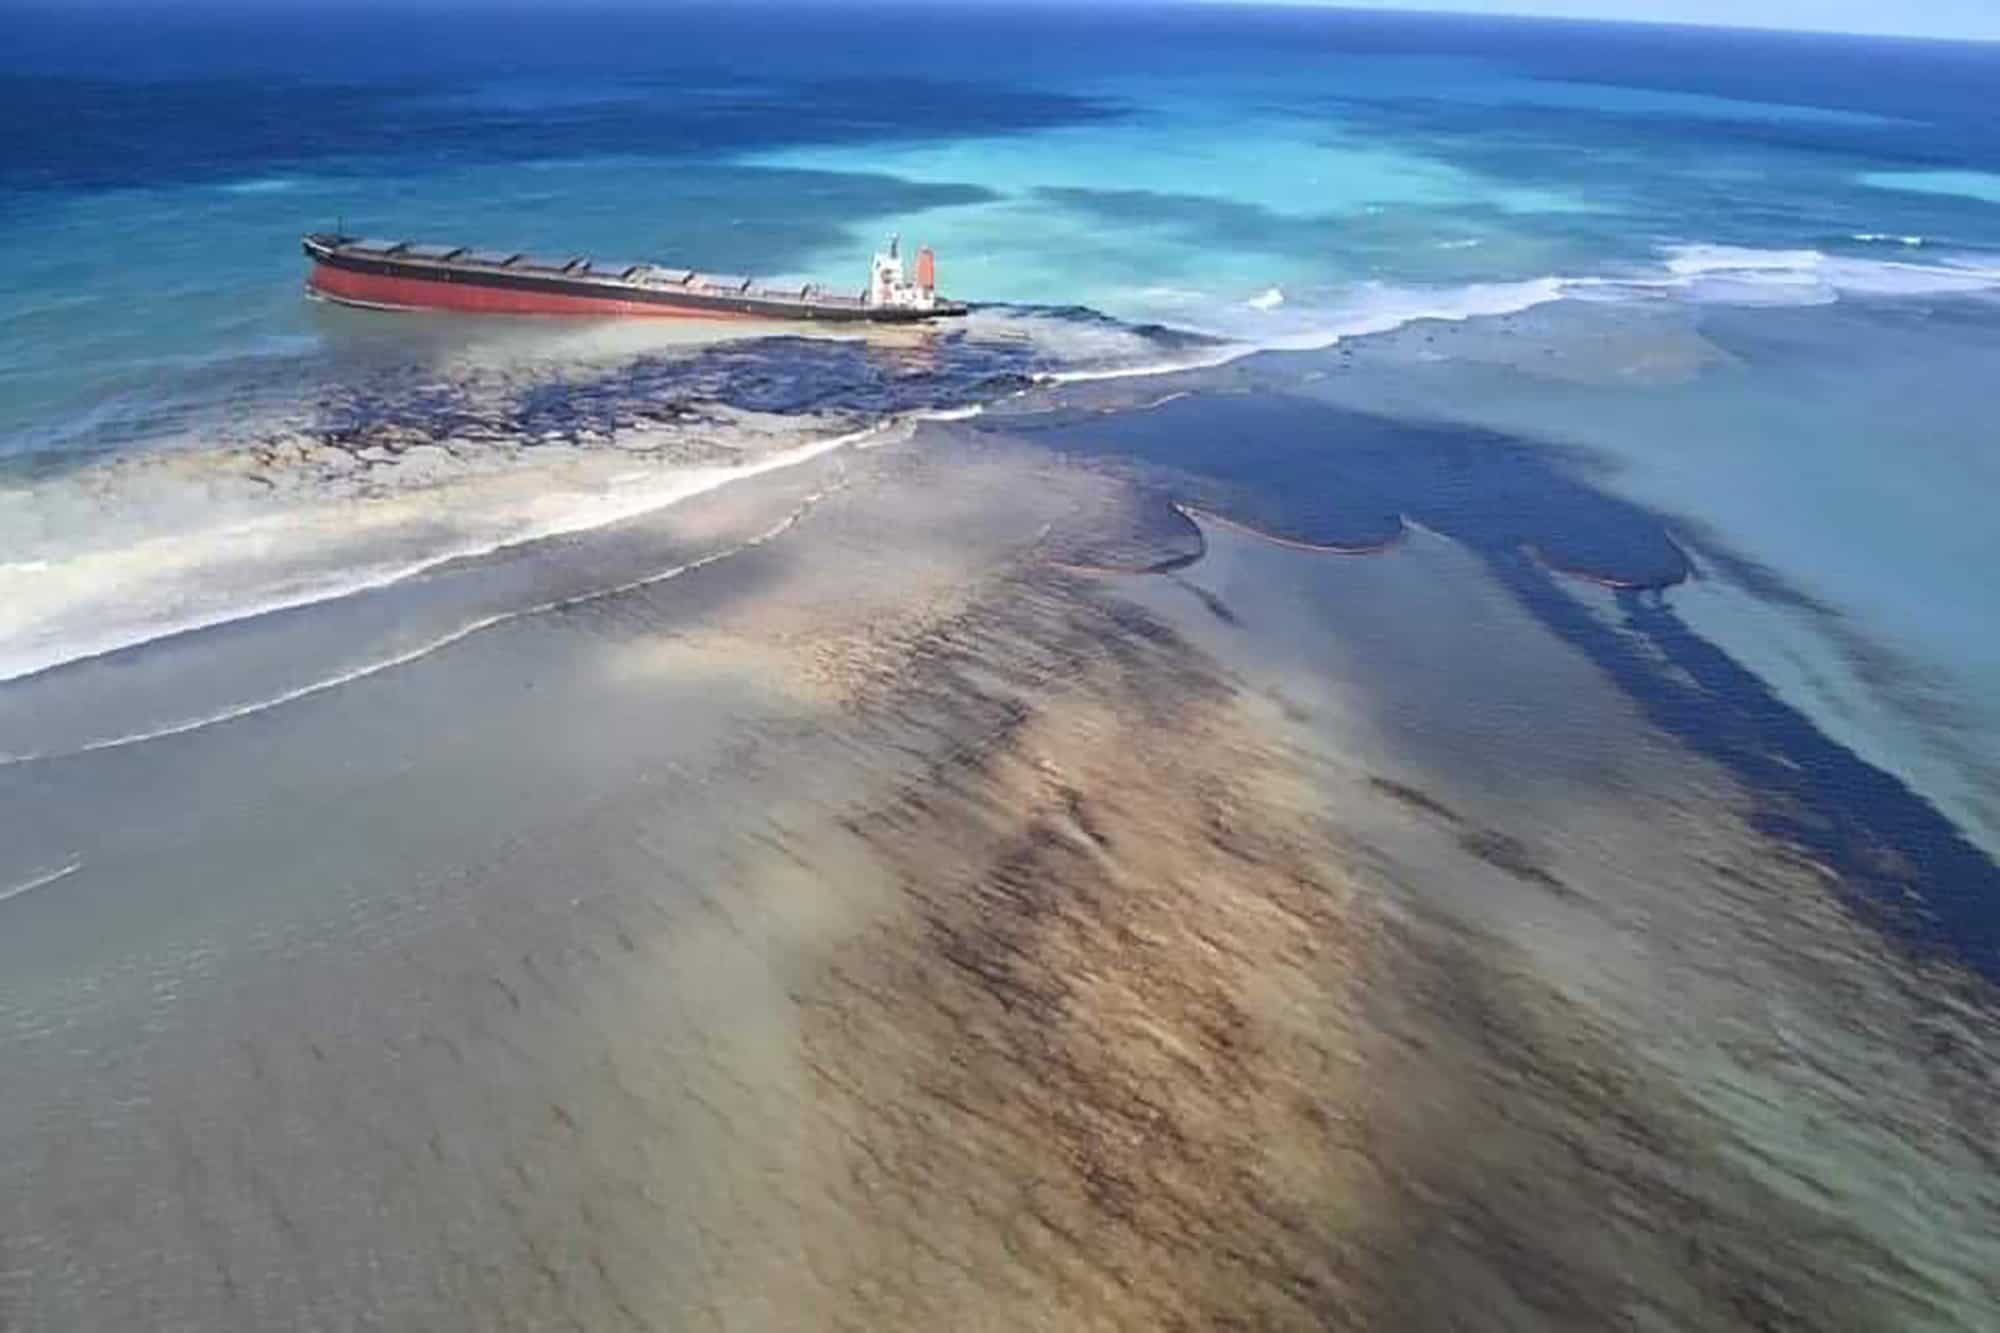 Mauritius scrambles to counter oil spill from grounded ship